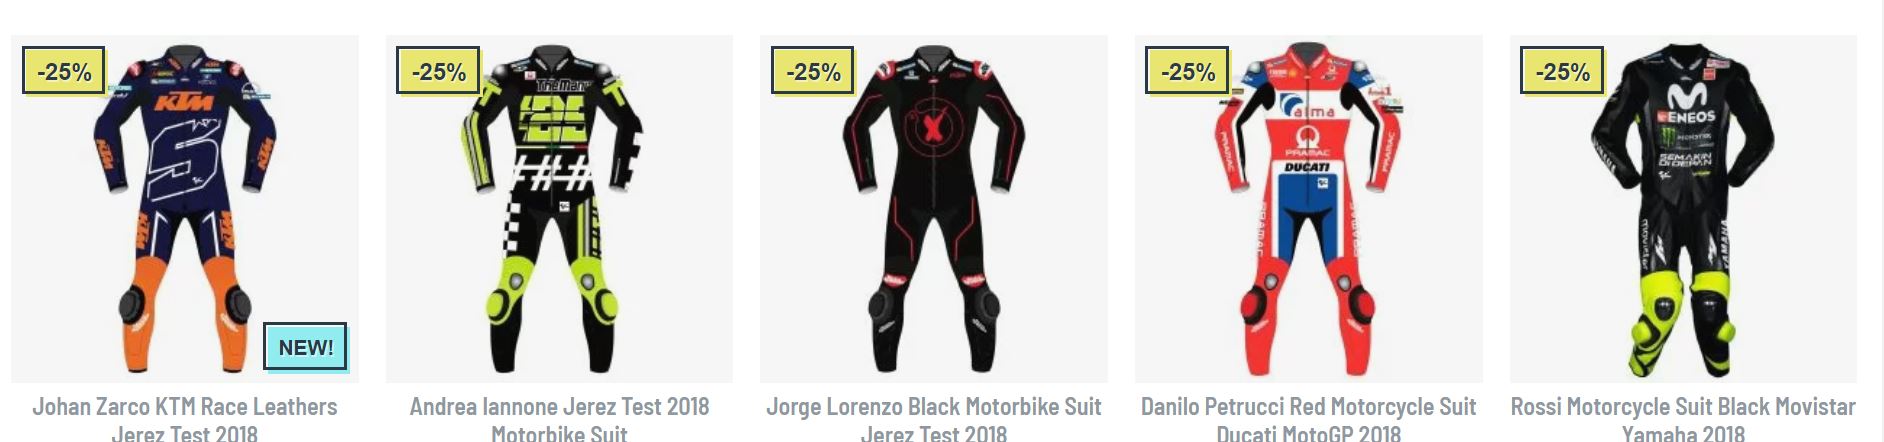 How much does a Motogp suit cost